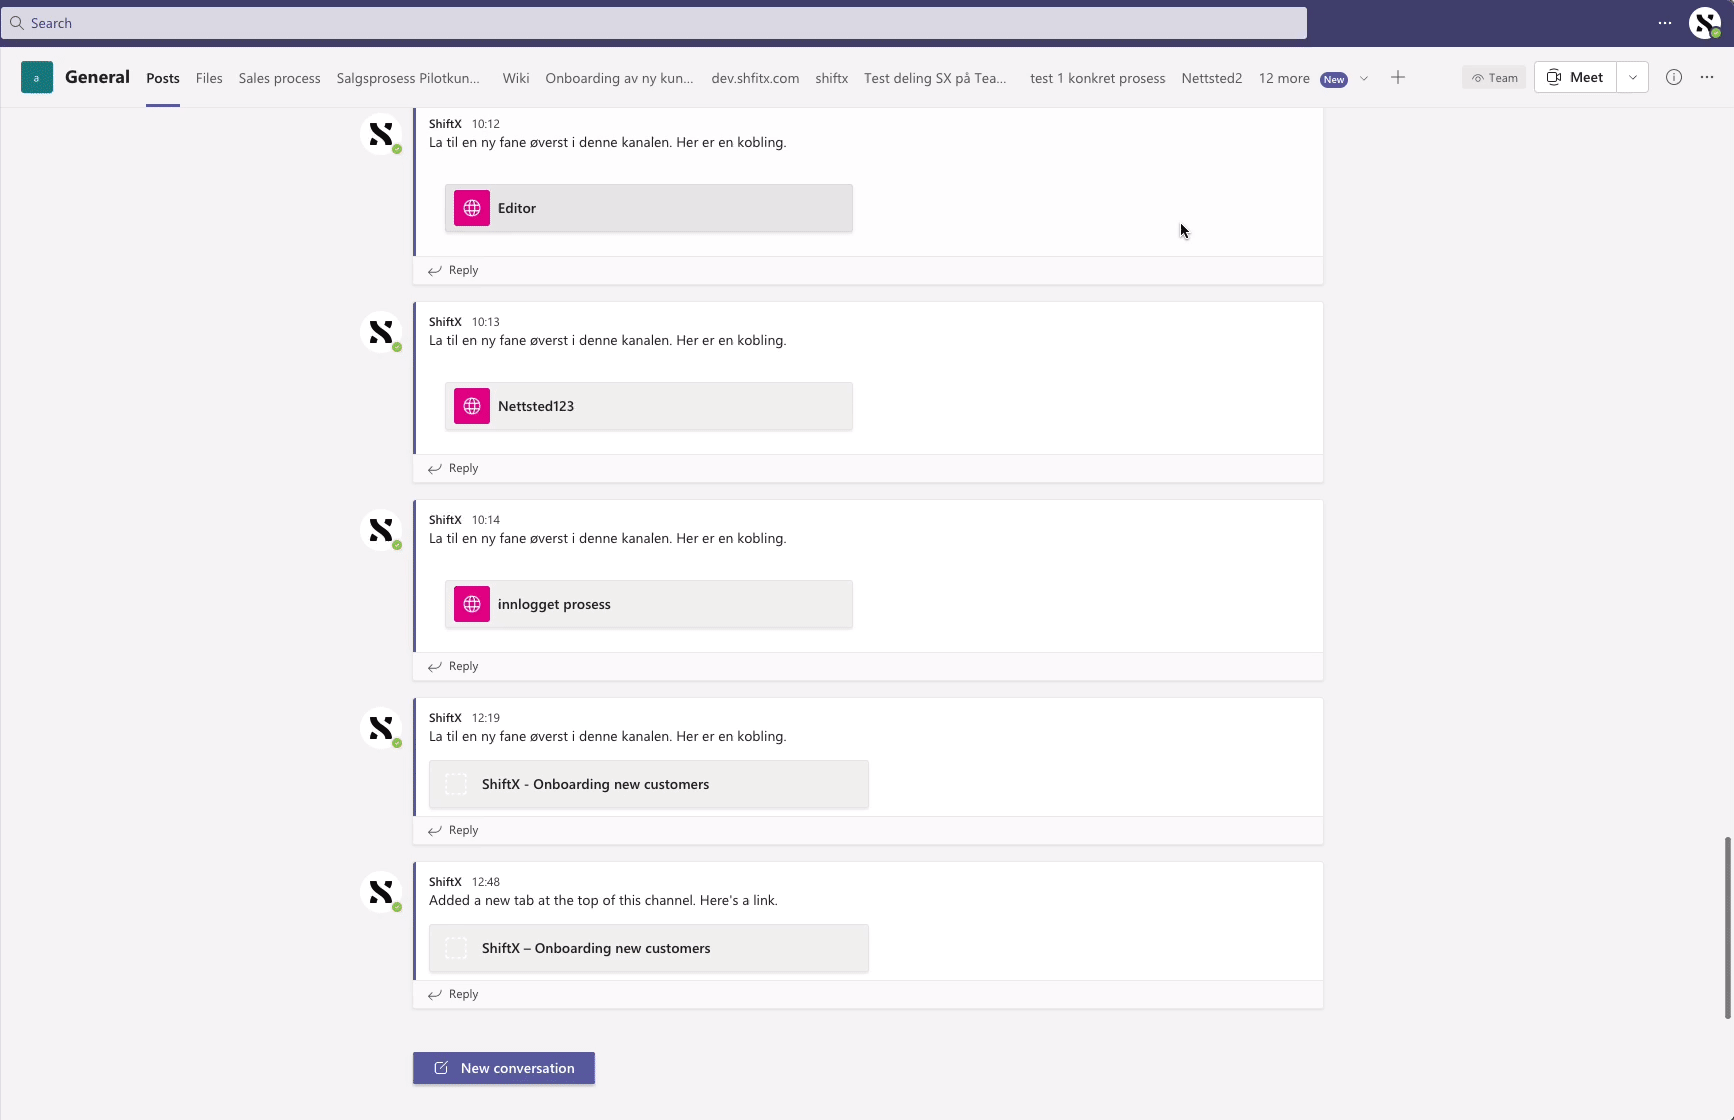 A short screenrecording of how to share a ShiftX flow in Microsoft Teams